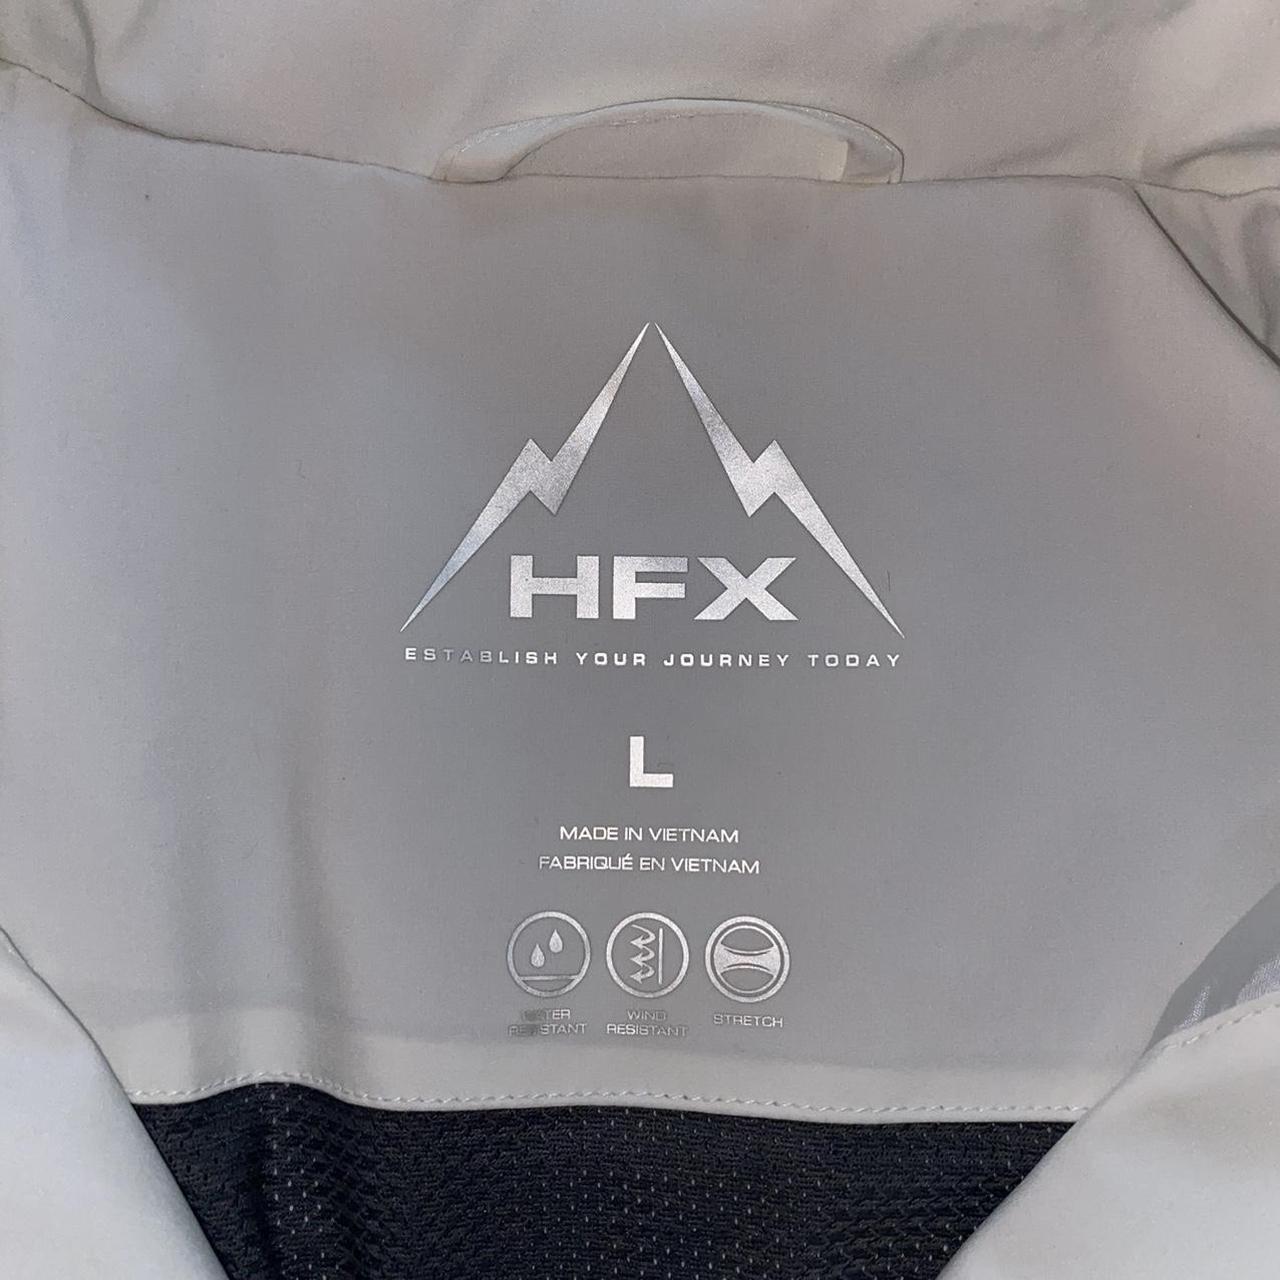 Product Image 4 - HFX Water/Wind Resistant Jacket
Free shipping